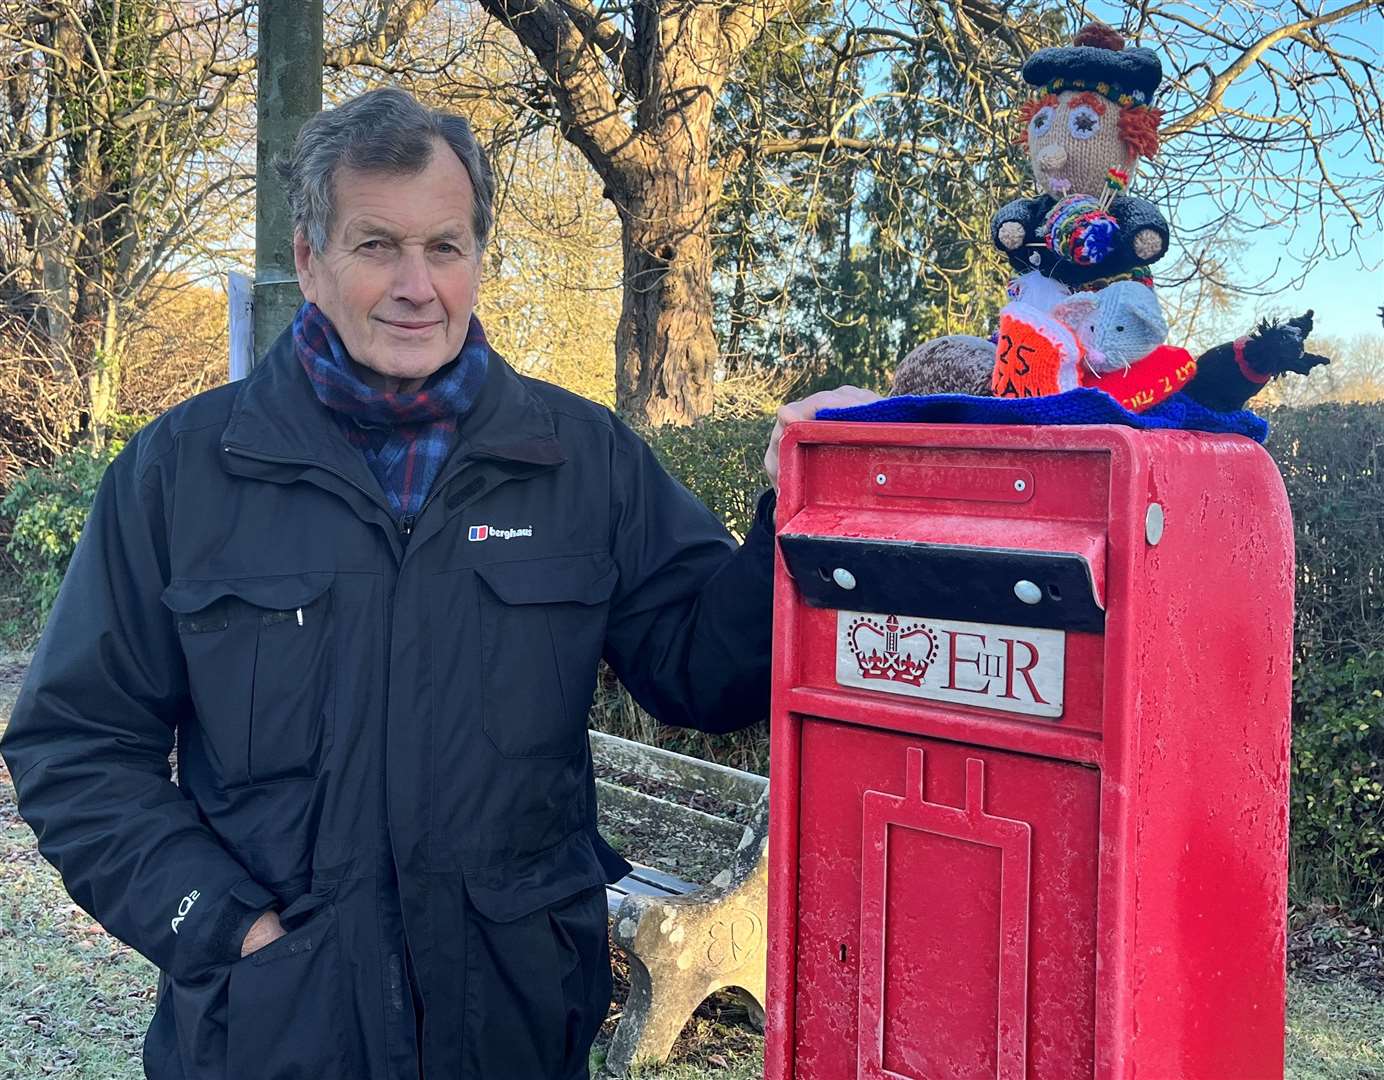 Councillor Brian Bristow is calling on Royal Mail to unlock the postbox in Smarden